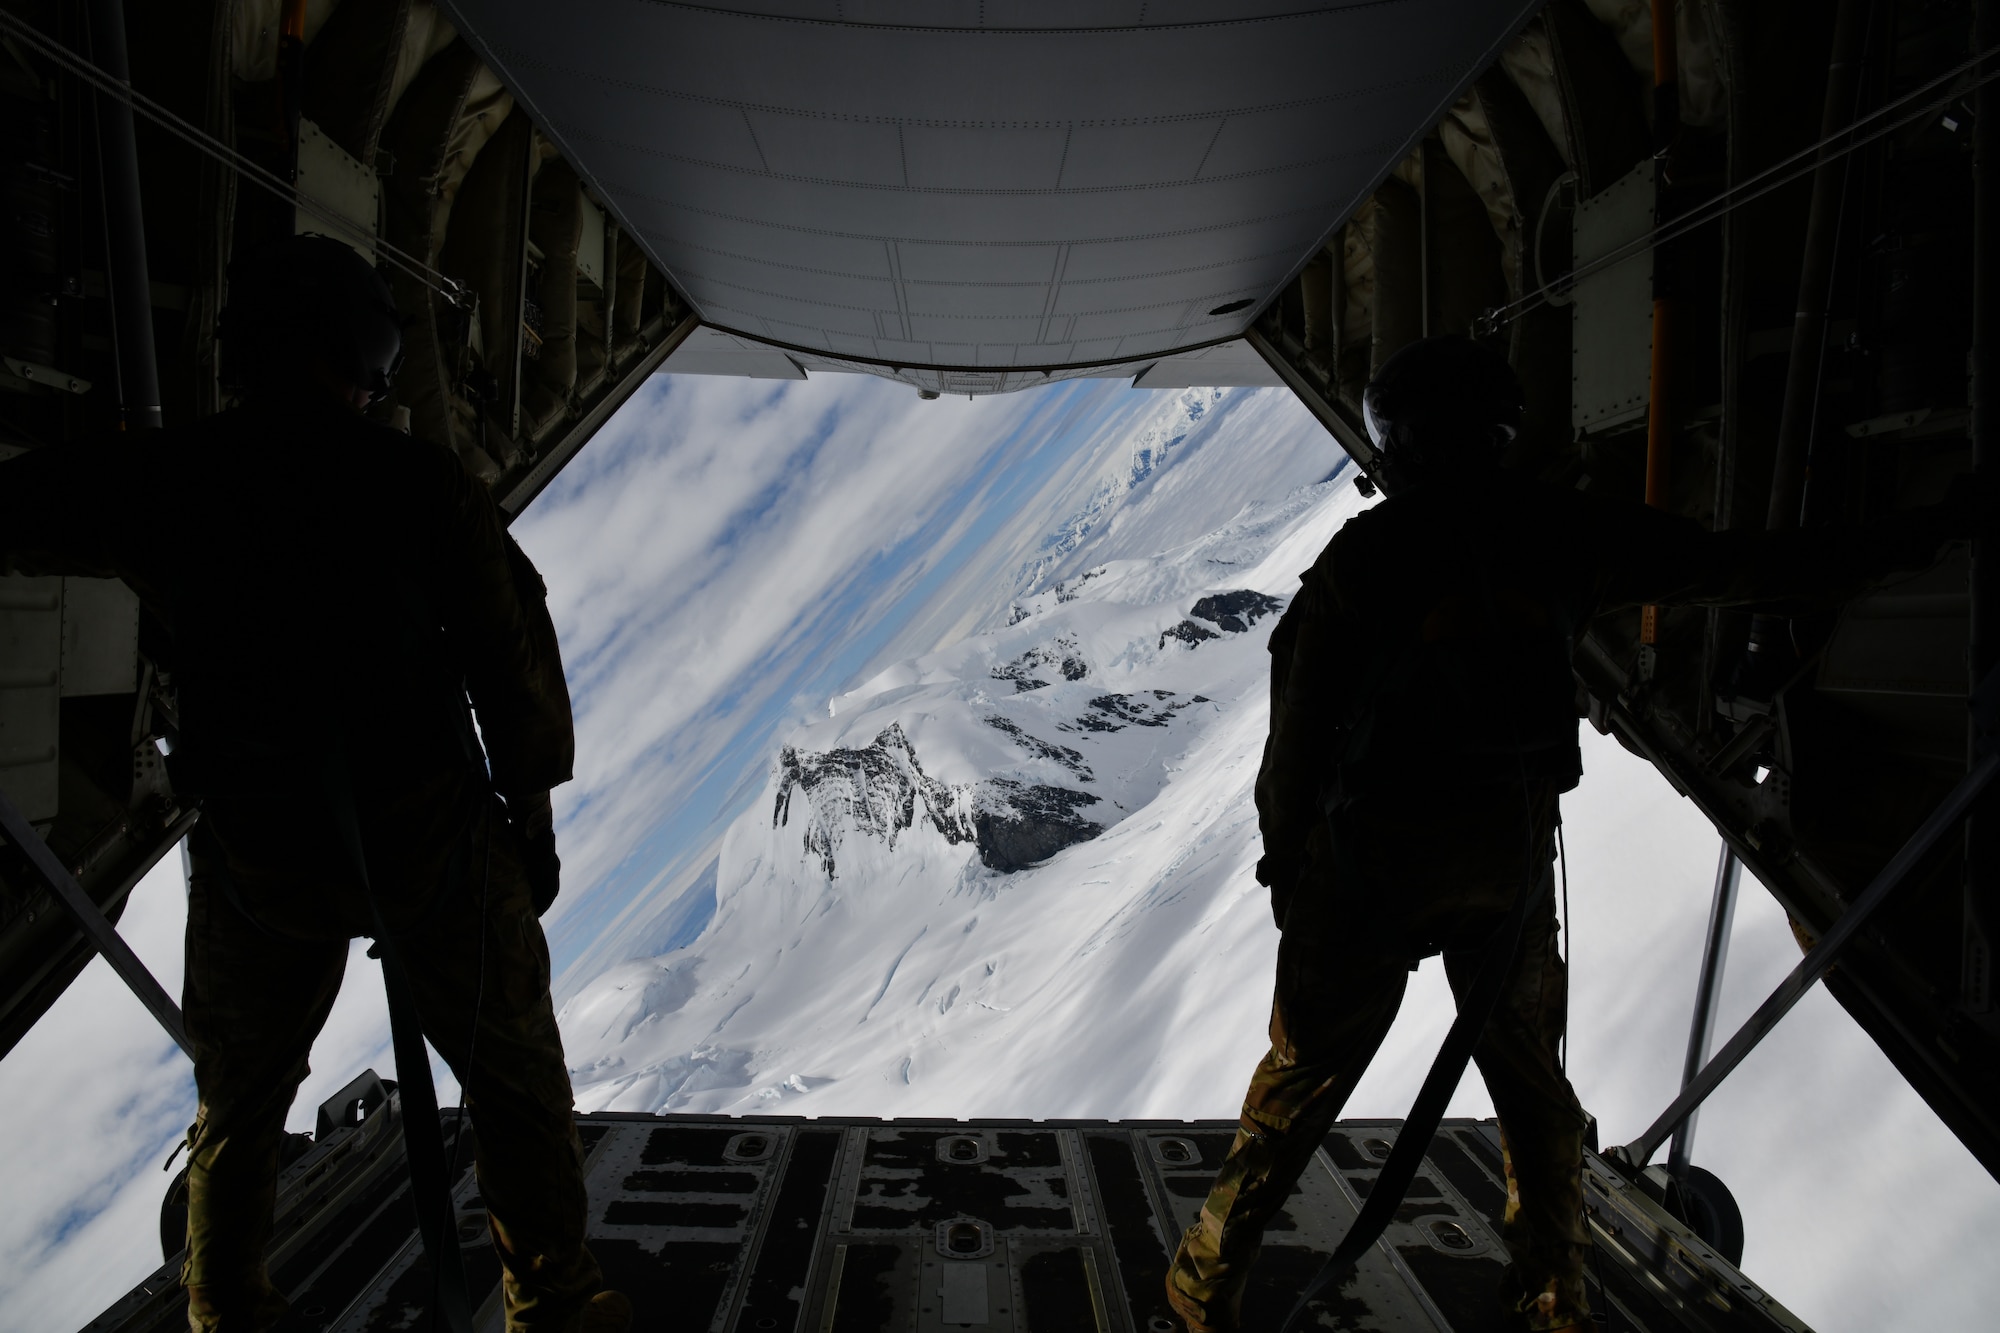 Tech. Sgt. Jacob Fountain (left) and Master Sgt. Gary Bryant (right), 815th Airlift Squadron loadmasters, hold on after opening the cargo door ramp while the pilots conduct low-level tactical flight training patterns during a training exercise at Joint Base Elmendorf-Richardson, Alaska, July 13-16, 2021. The terrain of the mountain, valleys and along with the colder temperatures provided a different challenge for the low-level flights, which were an effective tactic in training for hostile environments. (U.S. Air Force photo by Master Sgt. Jessica Kendziorek)